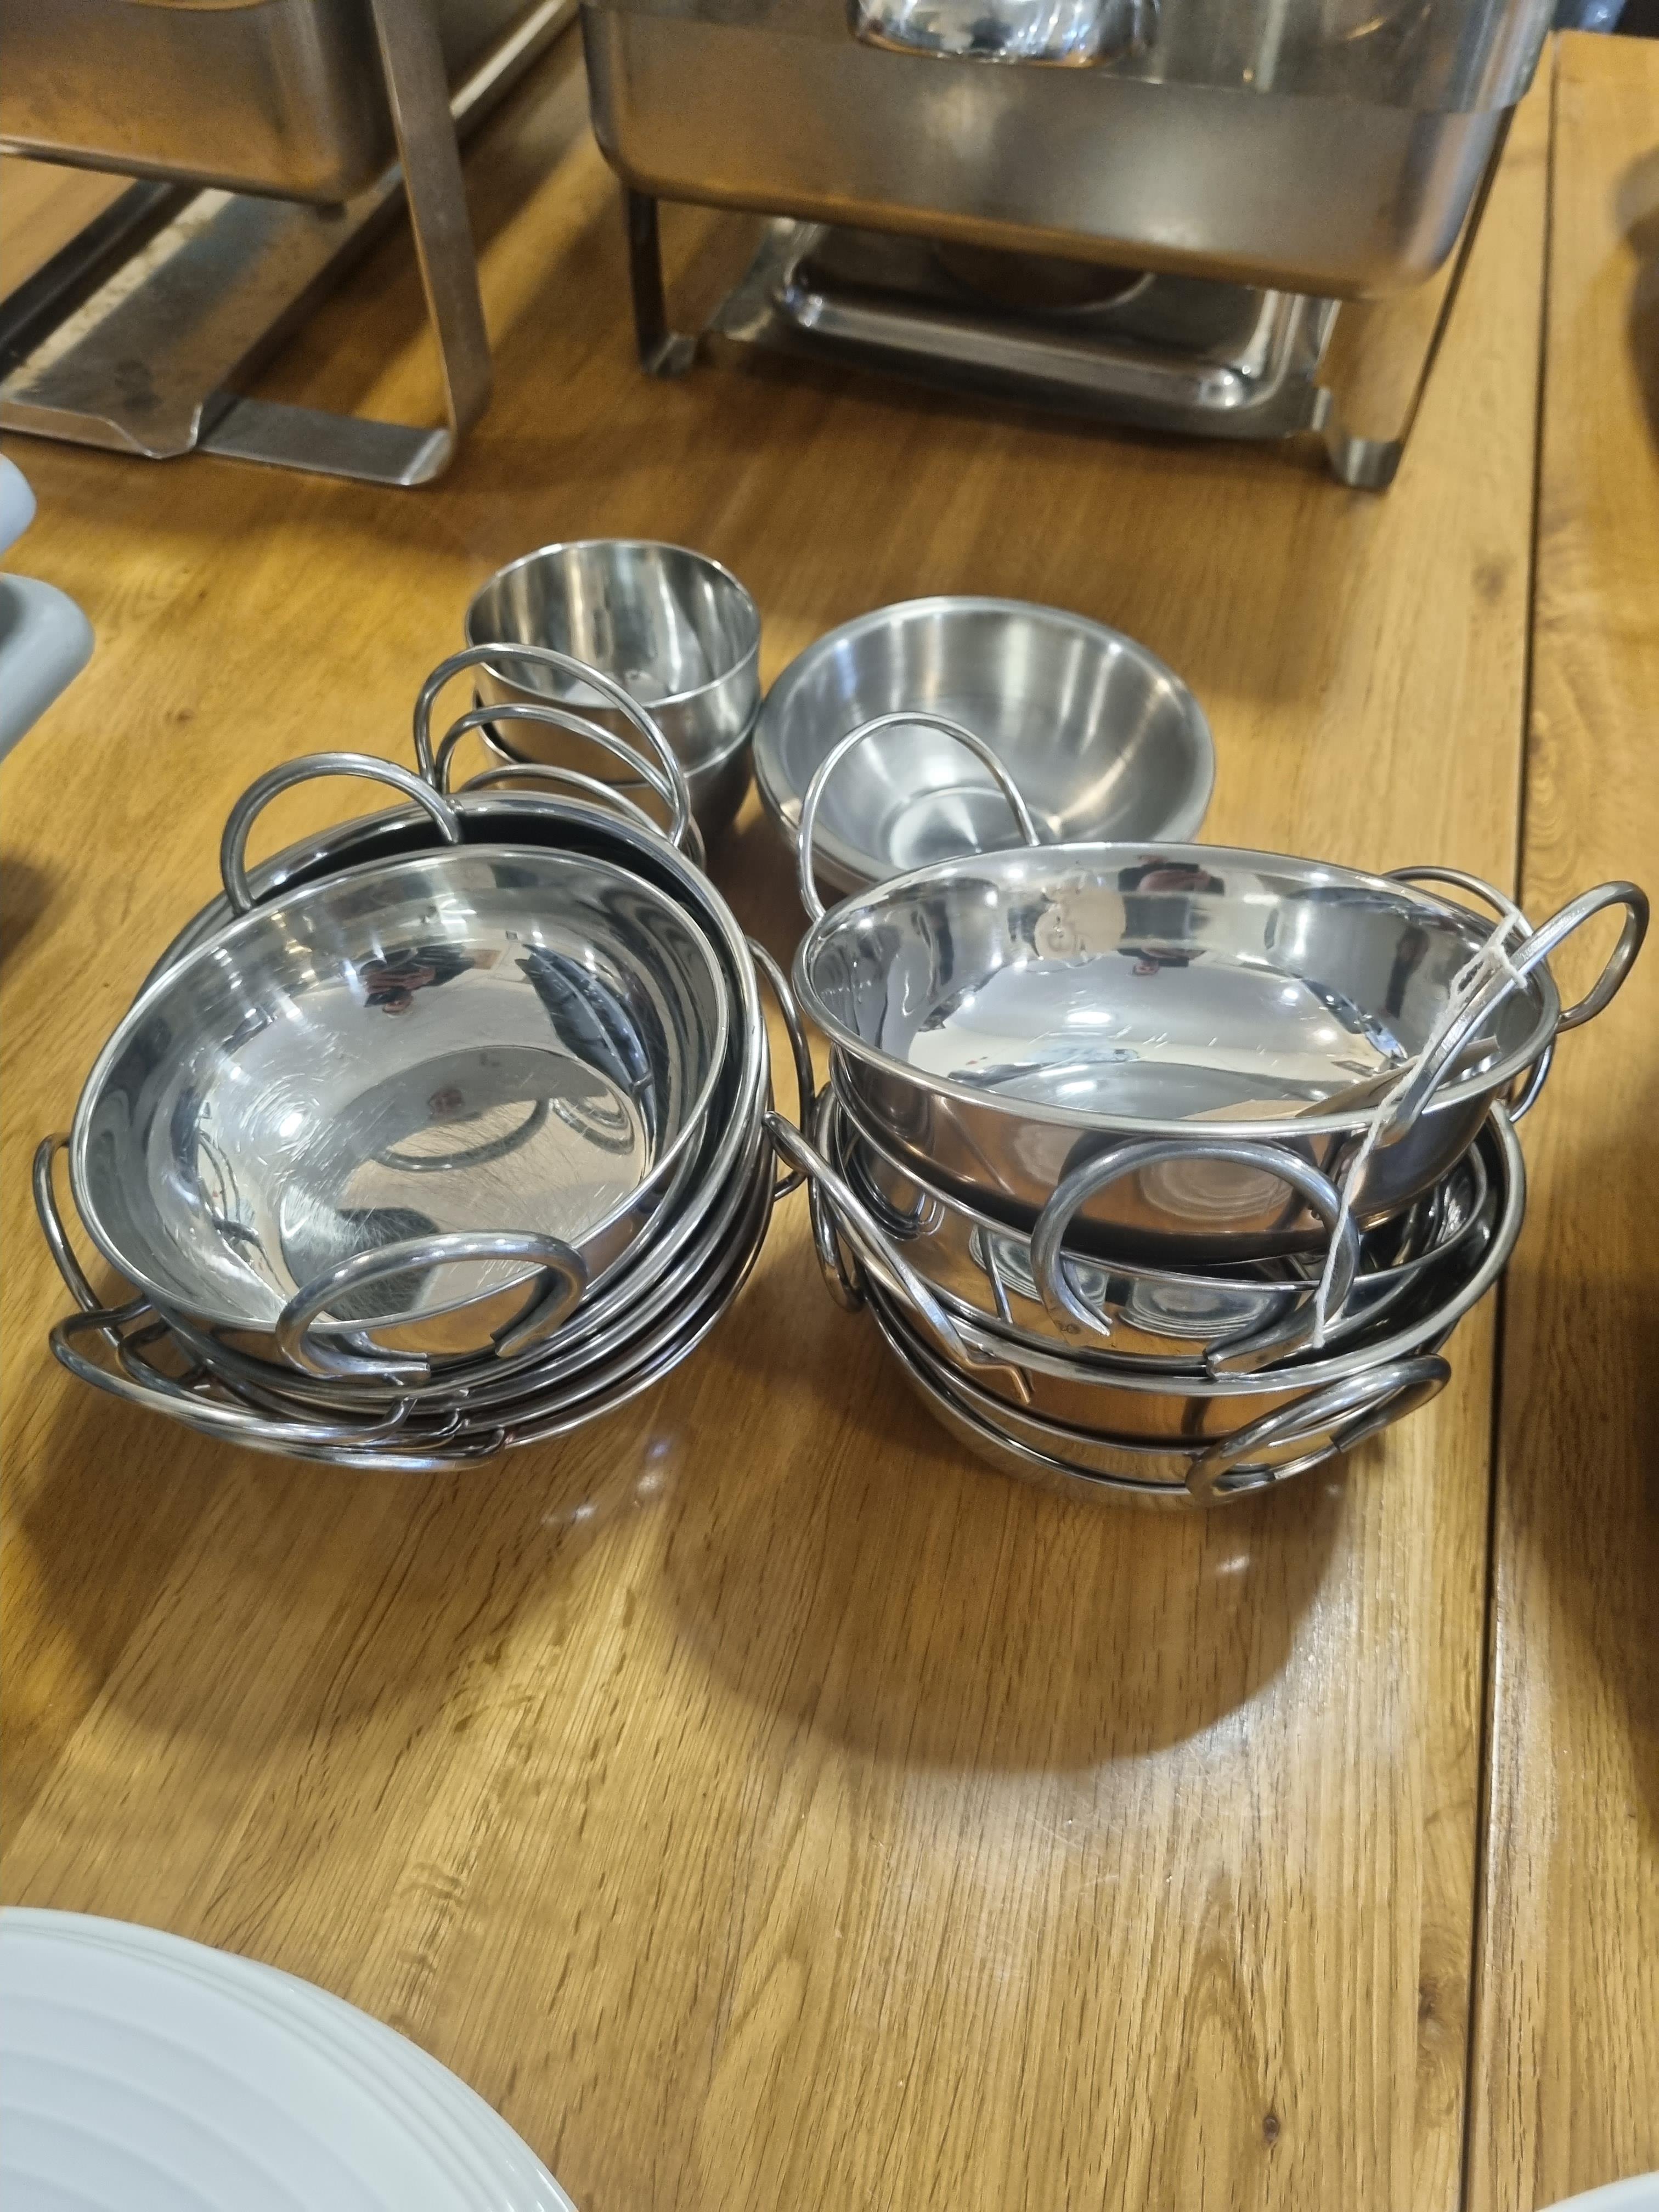 10 x Stainless Steel Curry Bowls and 8 X Stainless Steel Side Dishes In Various Sizes - Image 2 of 2